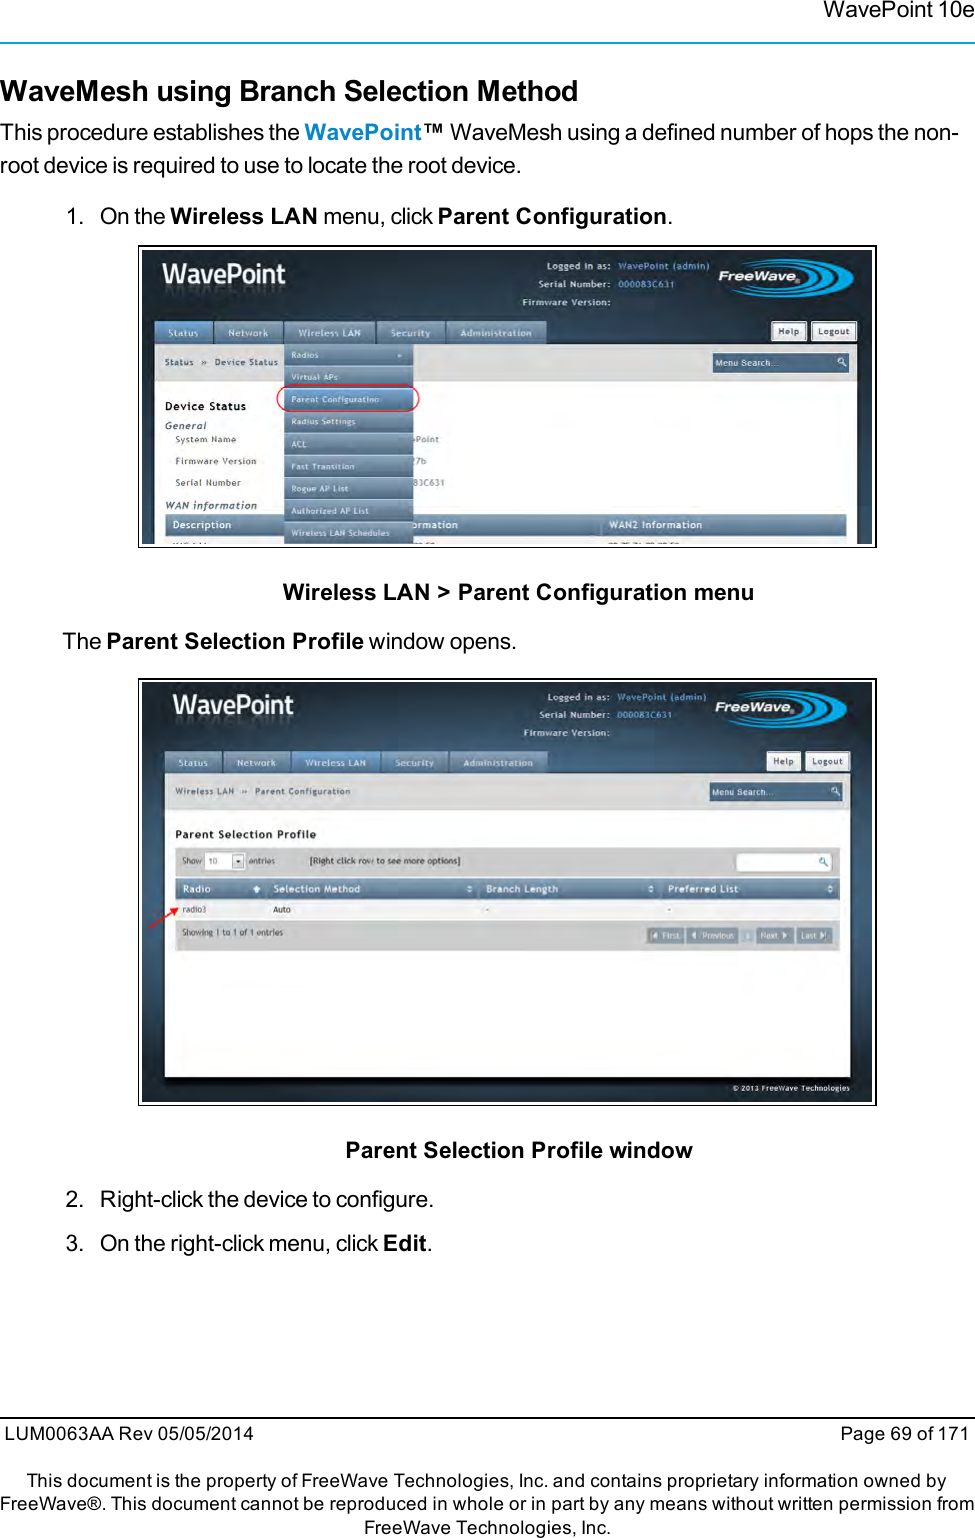 WavePoint 10eWaveMesh using Branch Selection MethodThis procedure establishes the WavePoint™WaveMesh using a defined number of hops the non-root device is required to use to locate the root device.1. On the Wireless LAN menu, click Parent Configuration.Wireless LAN &gt; Parent Configuration menuThe Parent Selection Profile window opens.Parent Selection Profile window2. Right-click the device to configure.3. On the right-click menu, click Edit.LUM0063AA Rev 05/05/2014 Page 69 of 171This document is the property of FreeWave Technologies, Inc. and contains proprietary information owned byFreeWave®. This document cannot be reproduced in whole or in part by any means without written permission fromFreeWave Technologies, Inc.